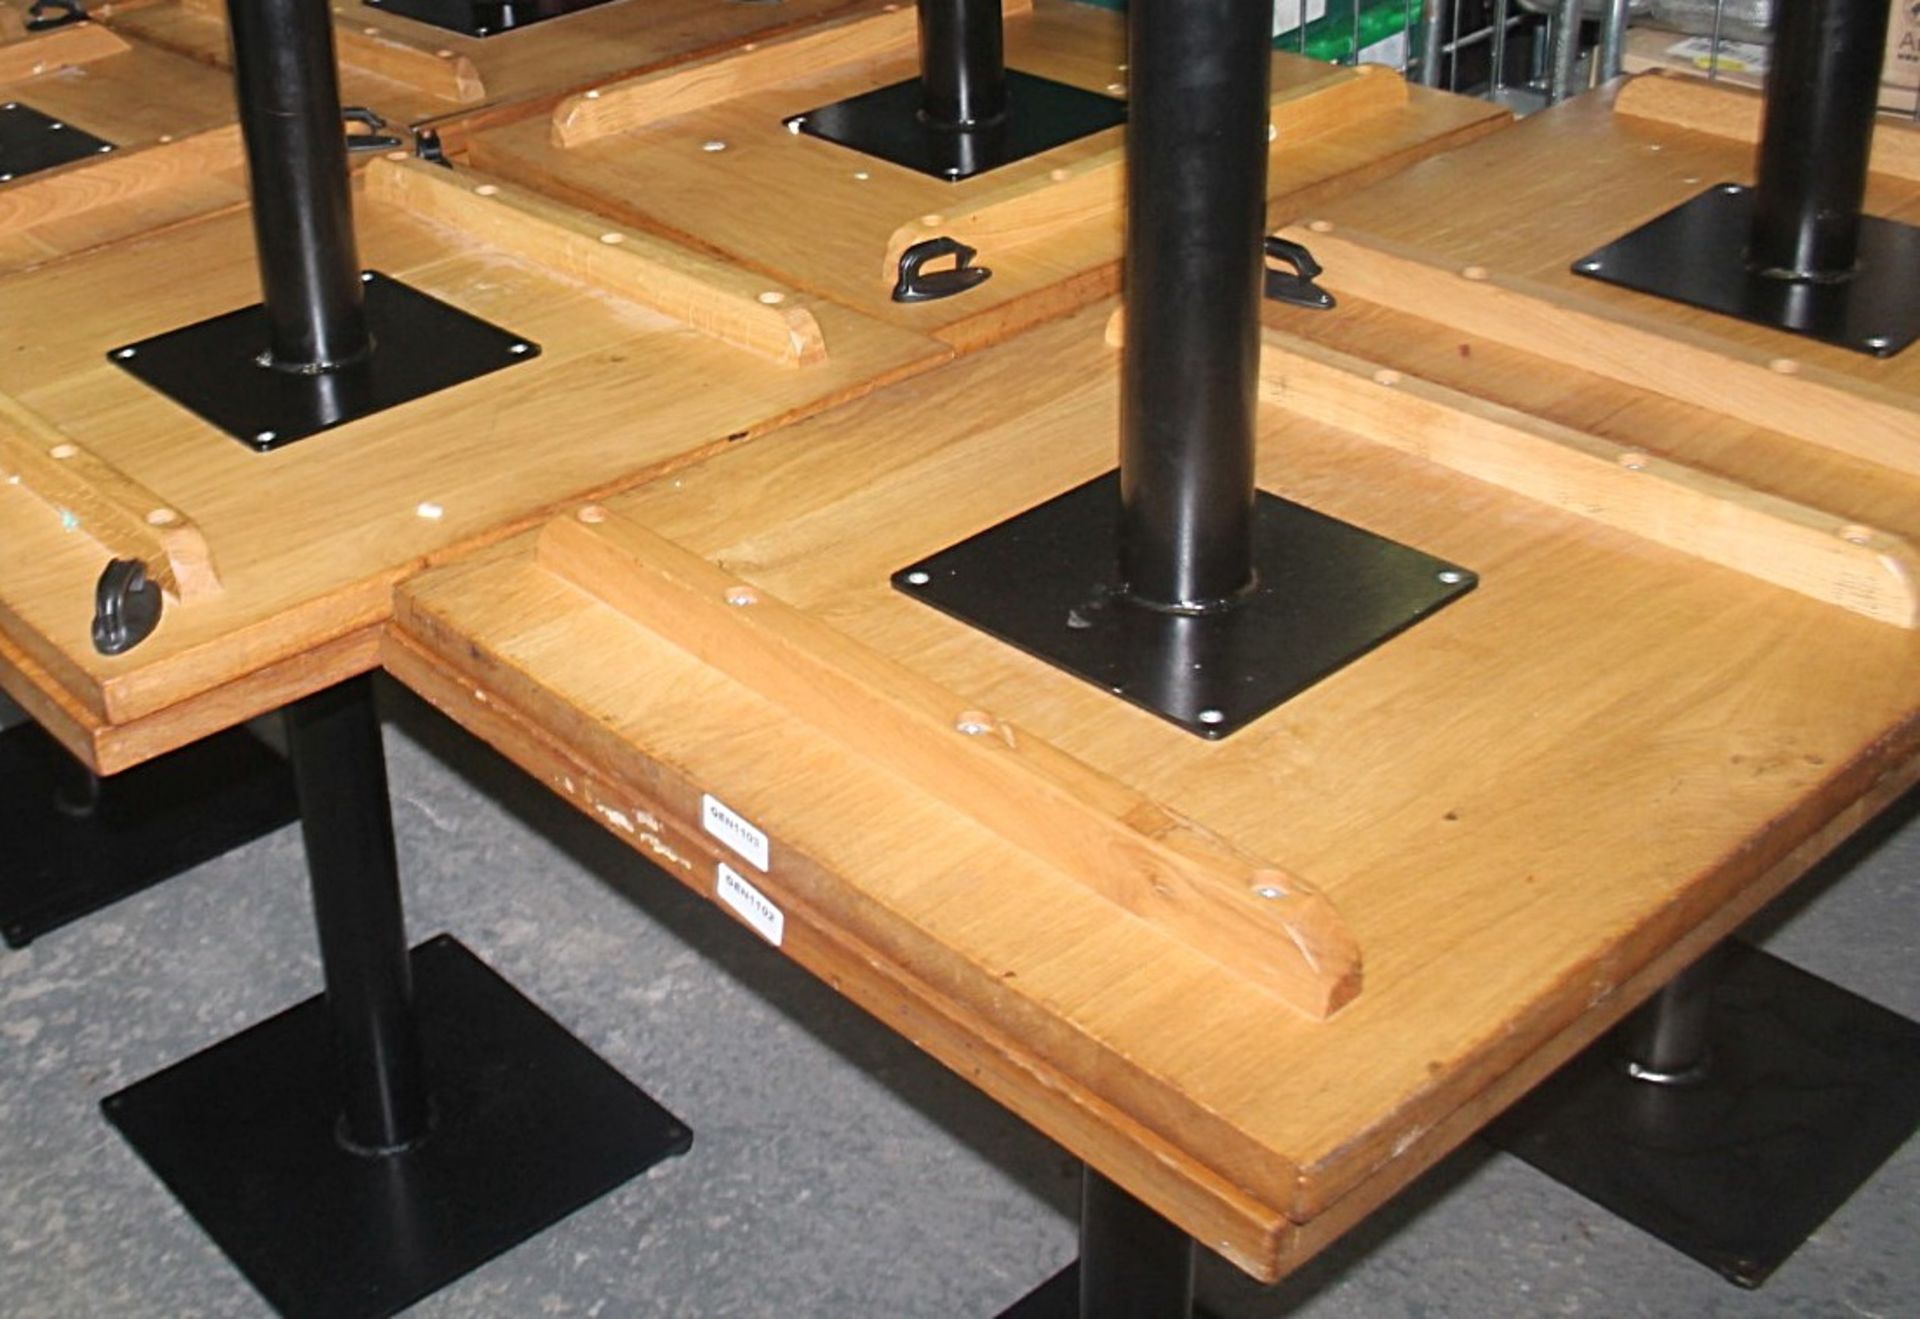 4 x Solid Oak Restaurant Dining Tables - Natural Rustic Knotty Oak Tops With Black Cast Iron Bases - - Image 3 of 7